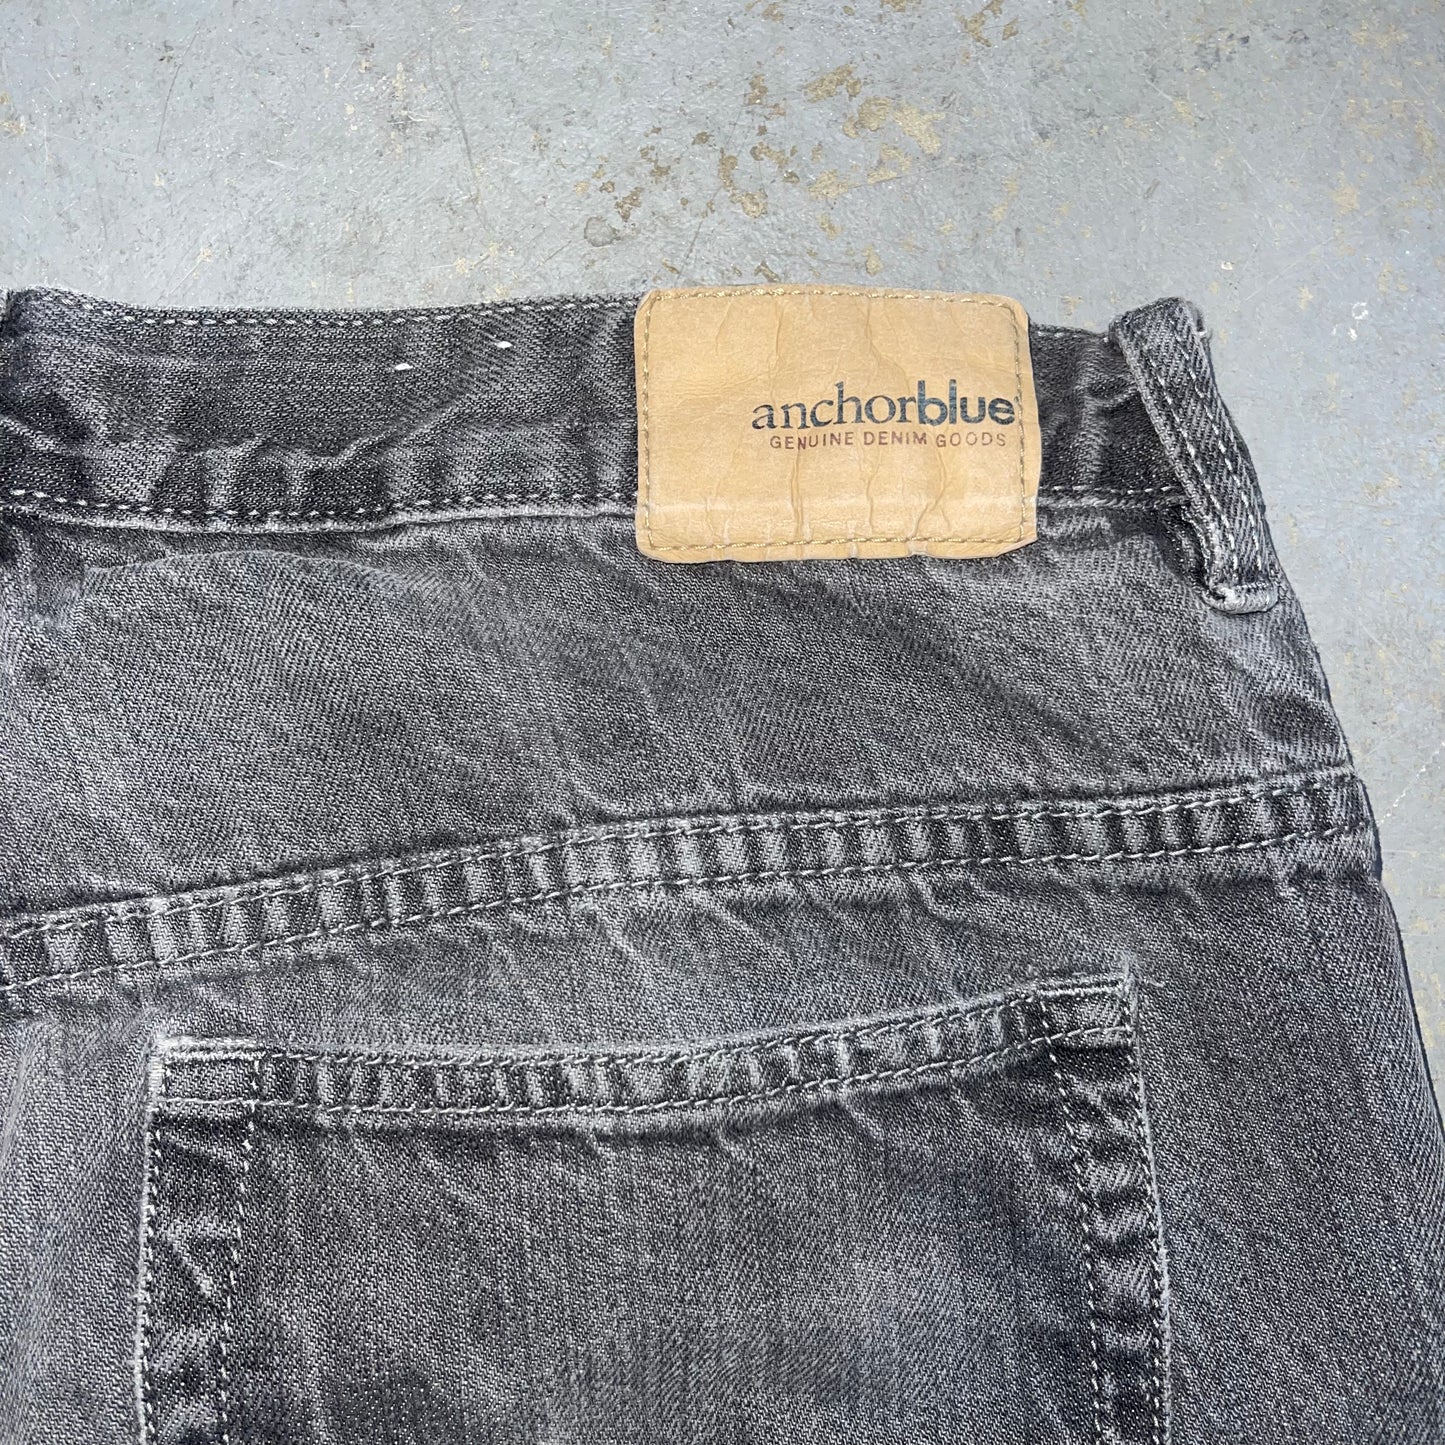 Anchor Blue LOOSE jeans. Size 32 x 32